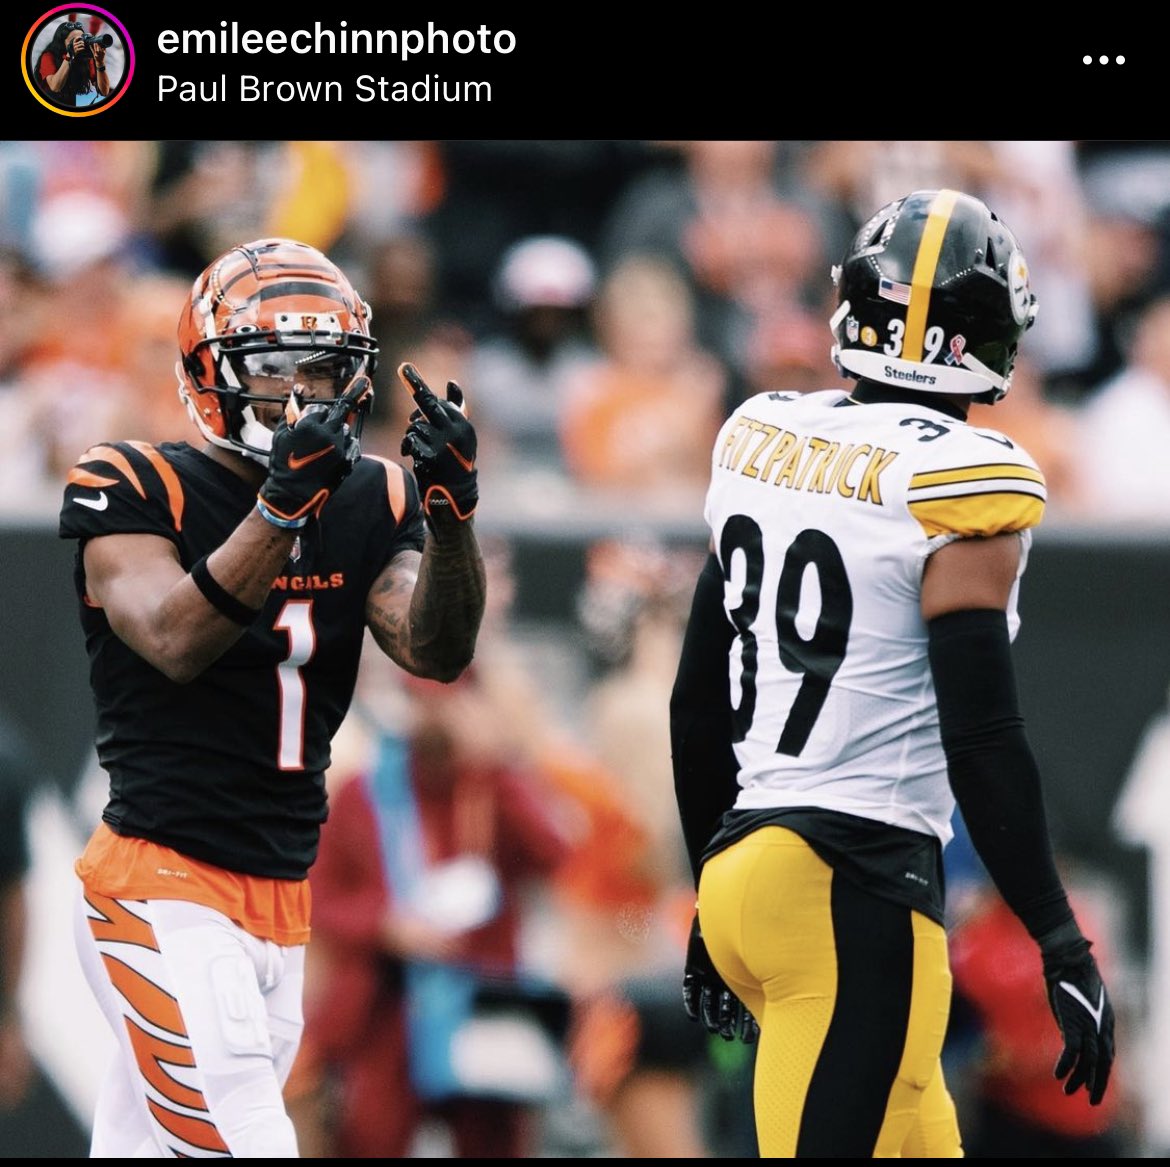 SteelersBengals See Chase hilariously show Fitzpatrick double birds